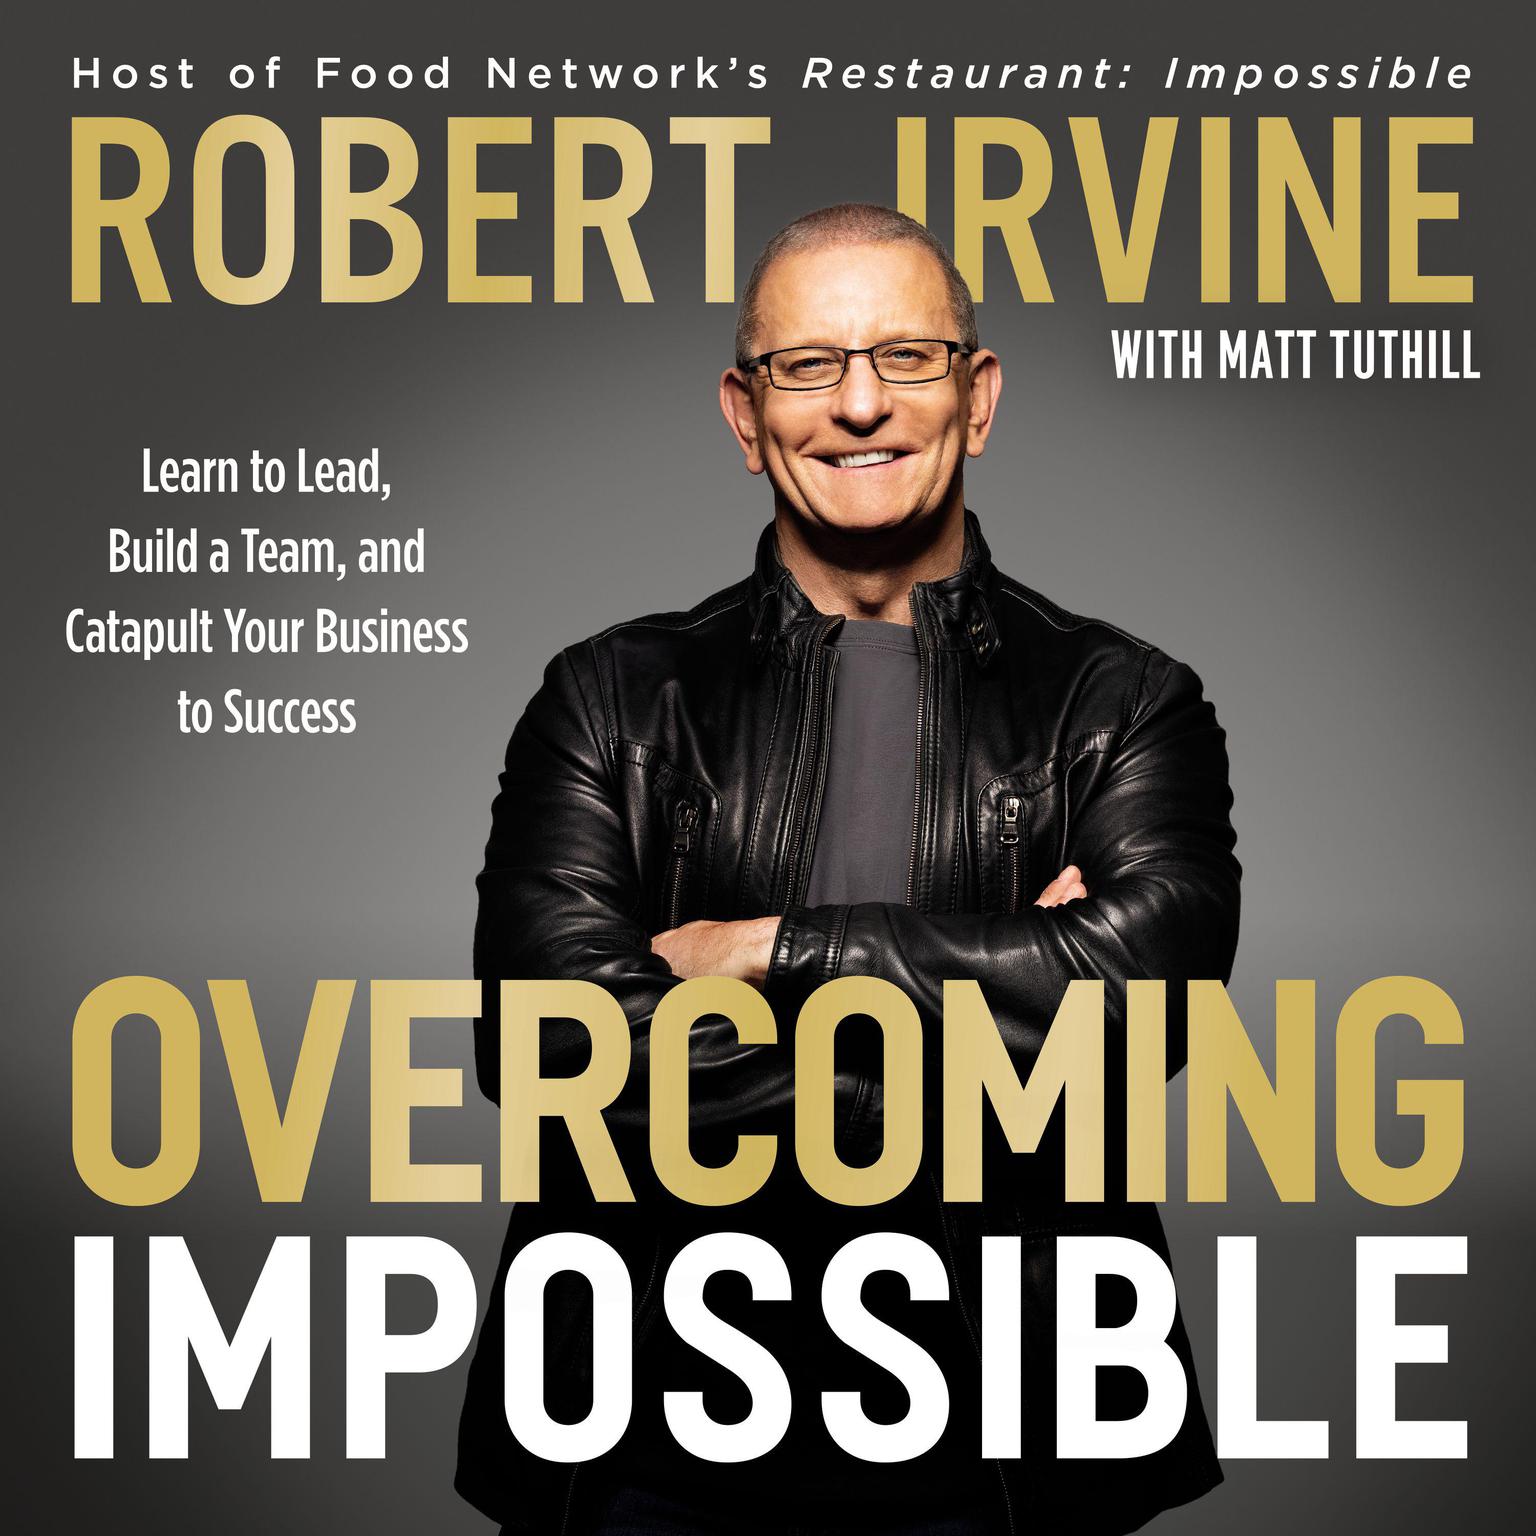 Overcoming Impossible: Learn to Lead, Build a Team, and Catapult Your Business to Success Audiobook, by Robert Irvine